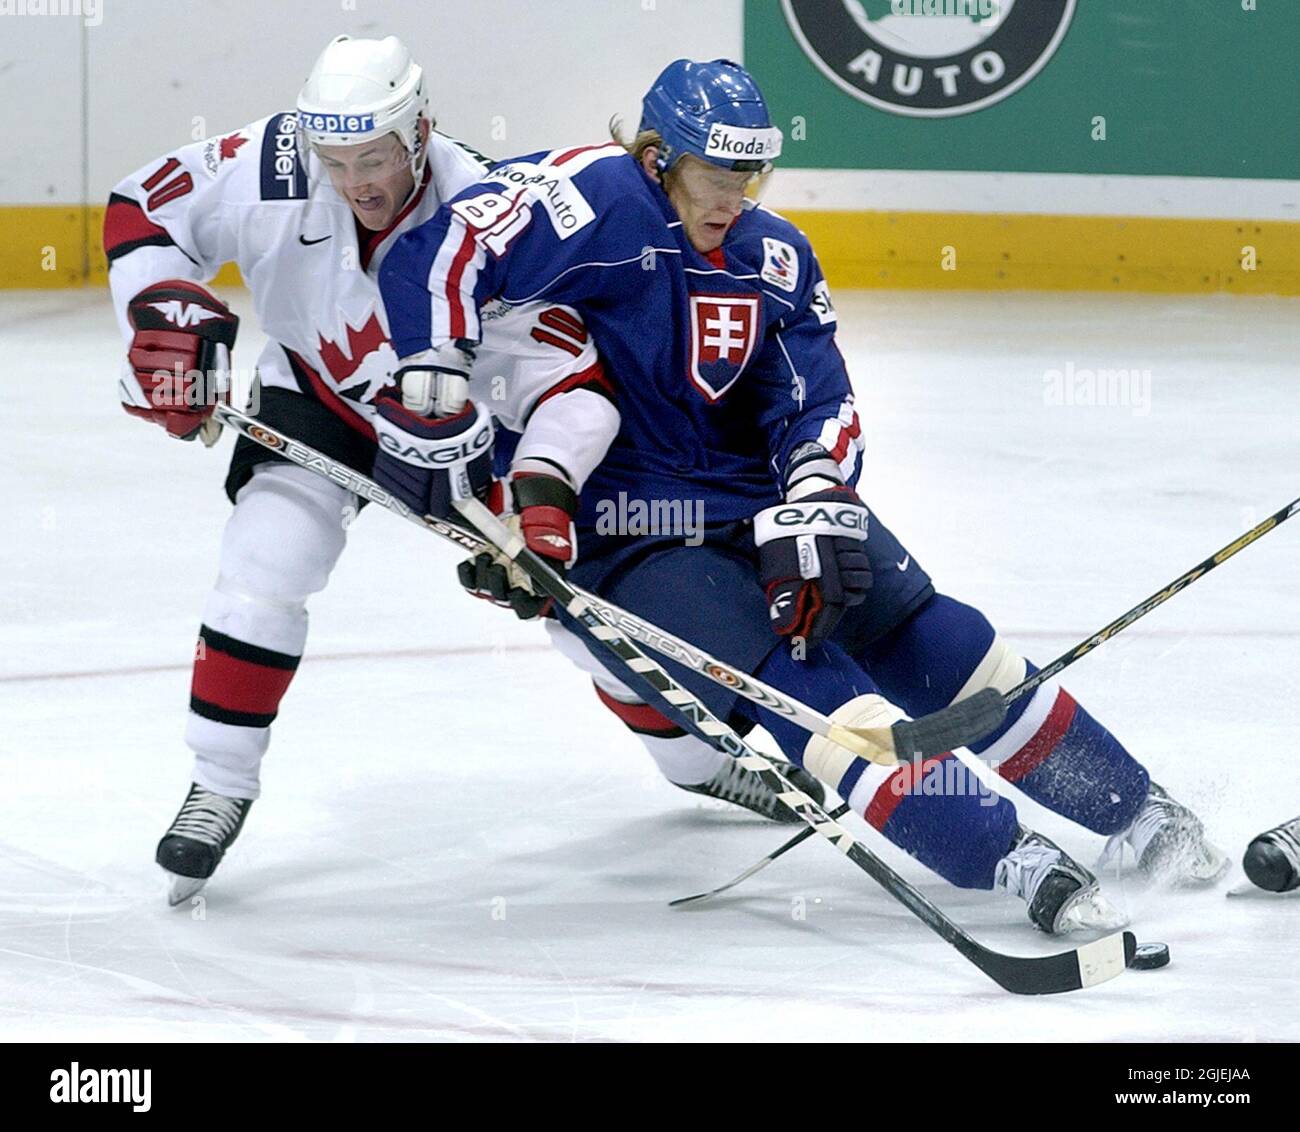 Canada's Shawn Horcoff (l) and Slovakia's Marian Hossa in action Stock Photo